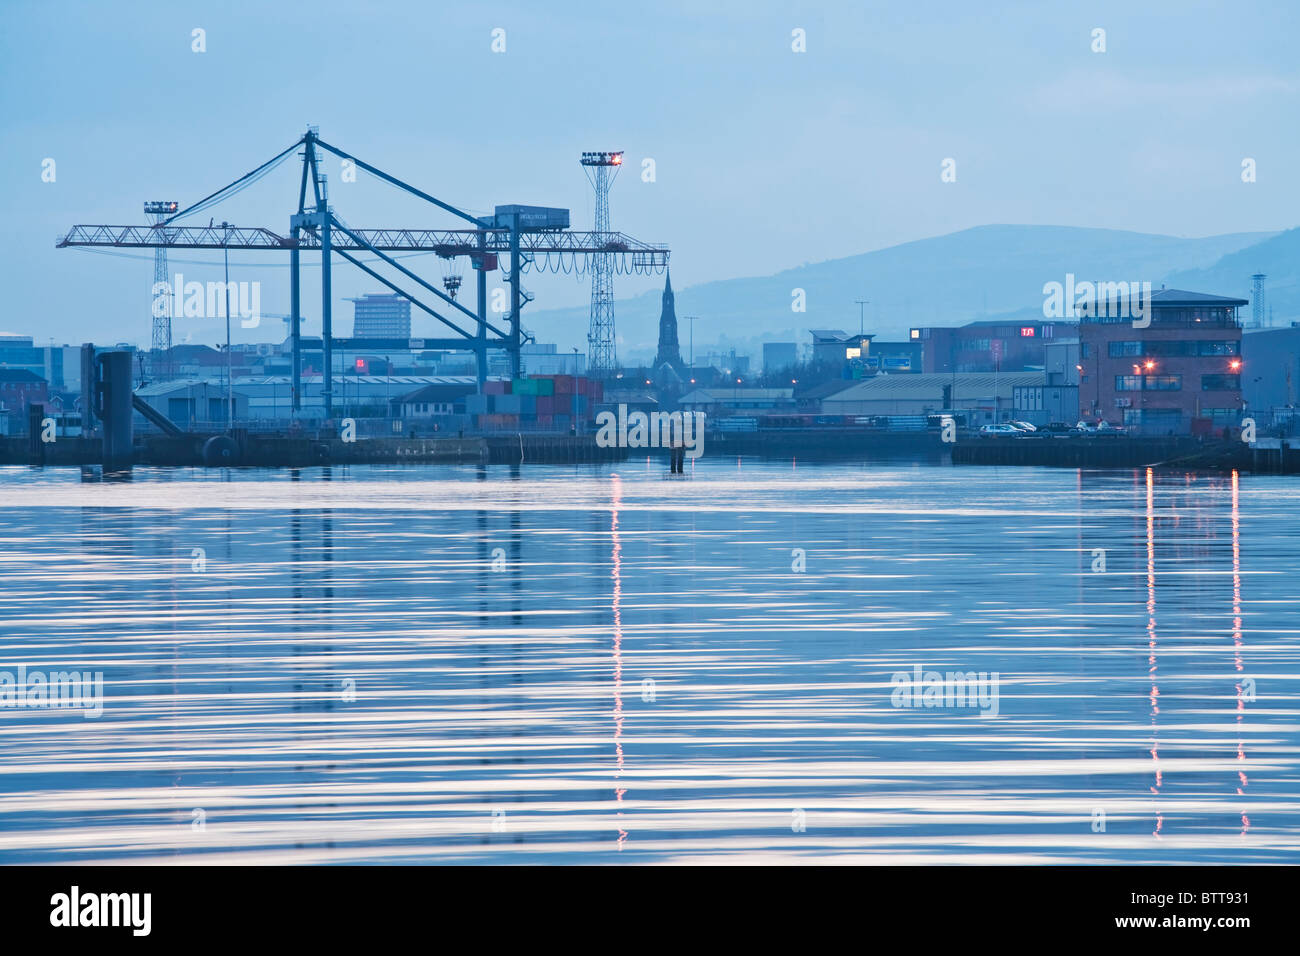 The cranes of Belfast dock reflected in the River Lagan at dusk, Northern Ireland Stock Photo